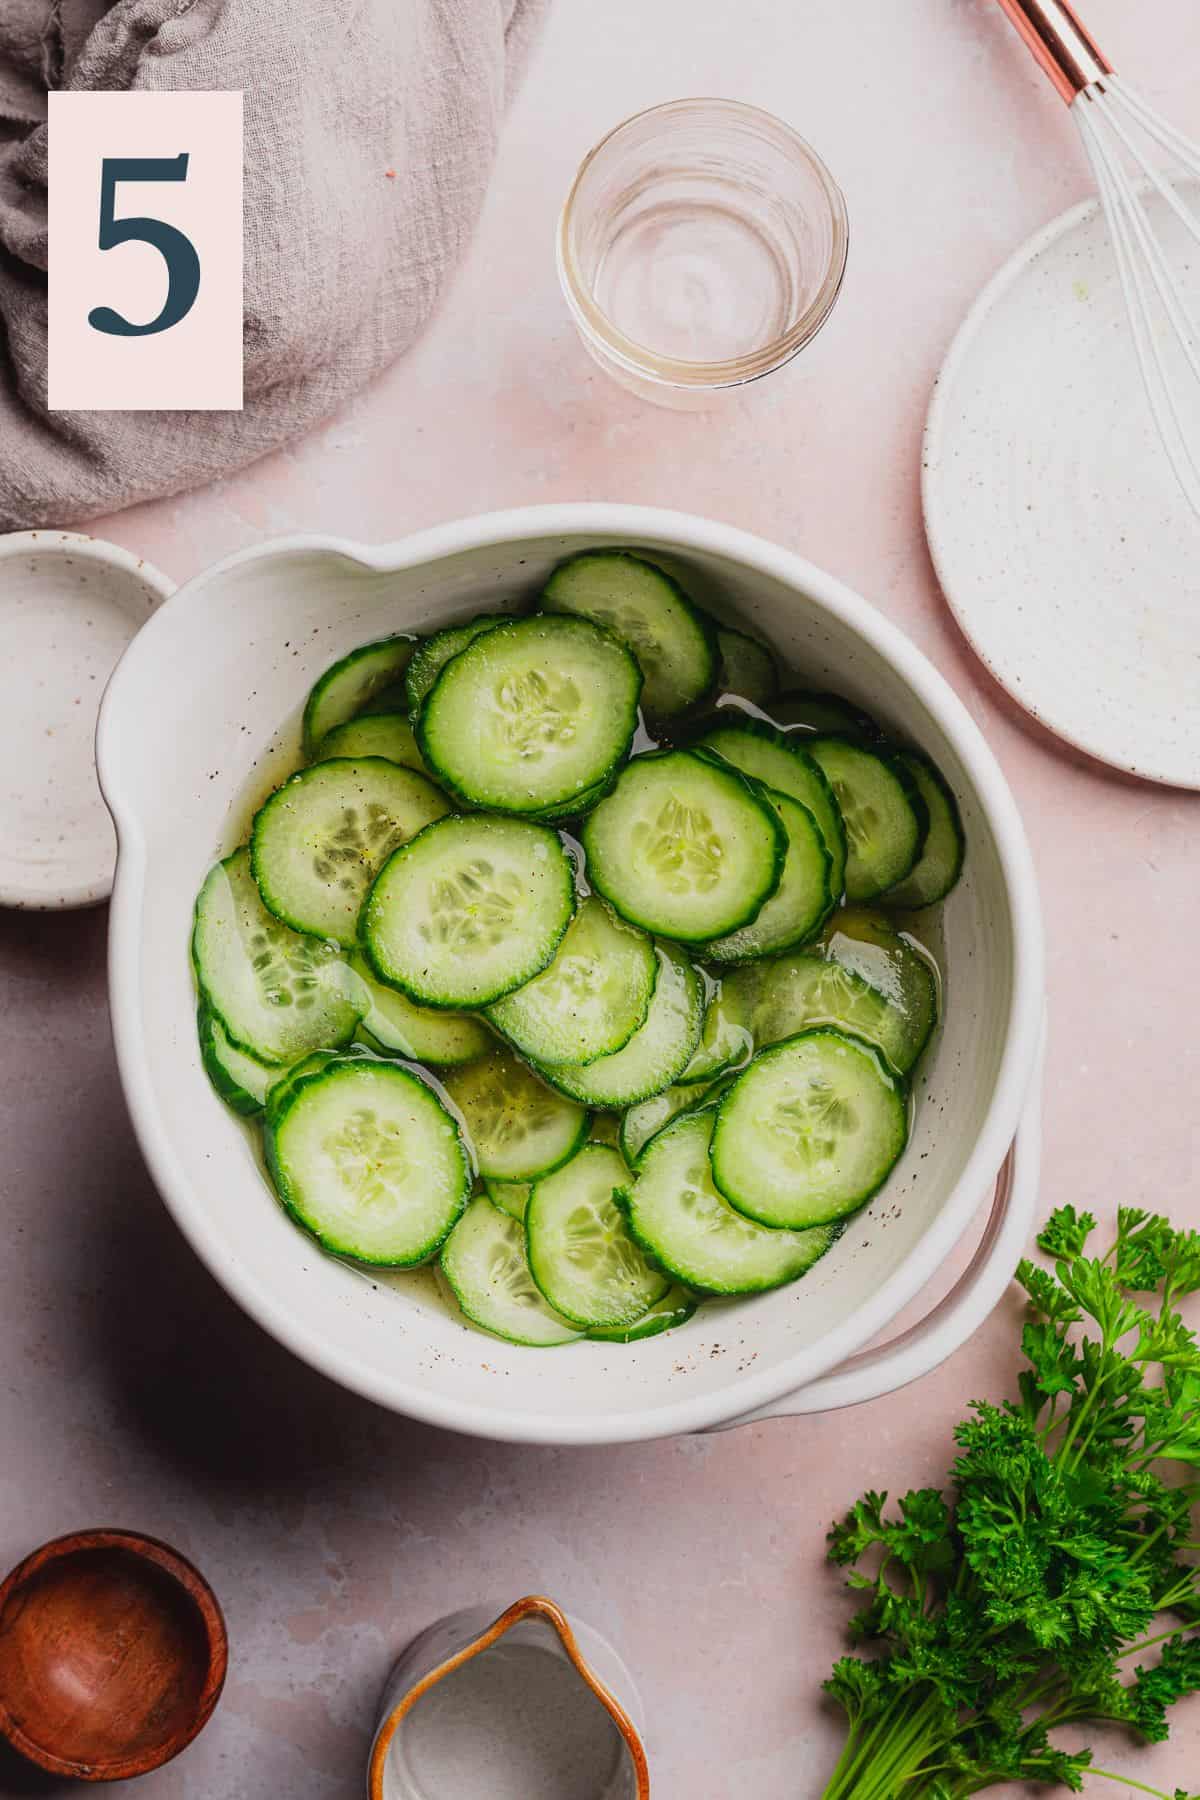 Cucumbers combined with vinegar mixture to sit in the fridge and absorb flavor for 30 minutes.